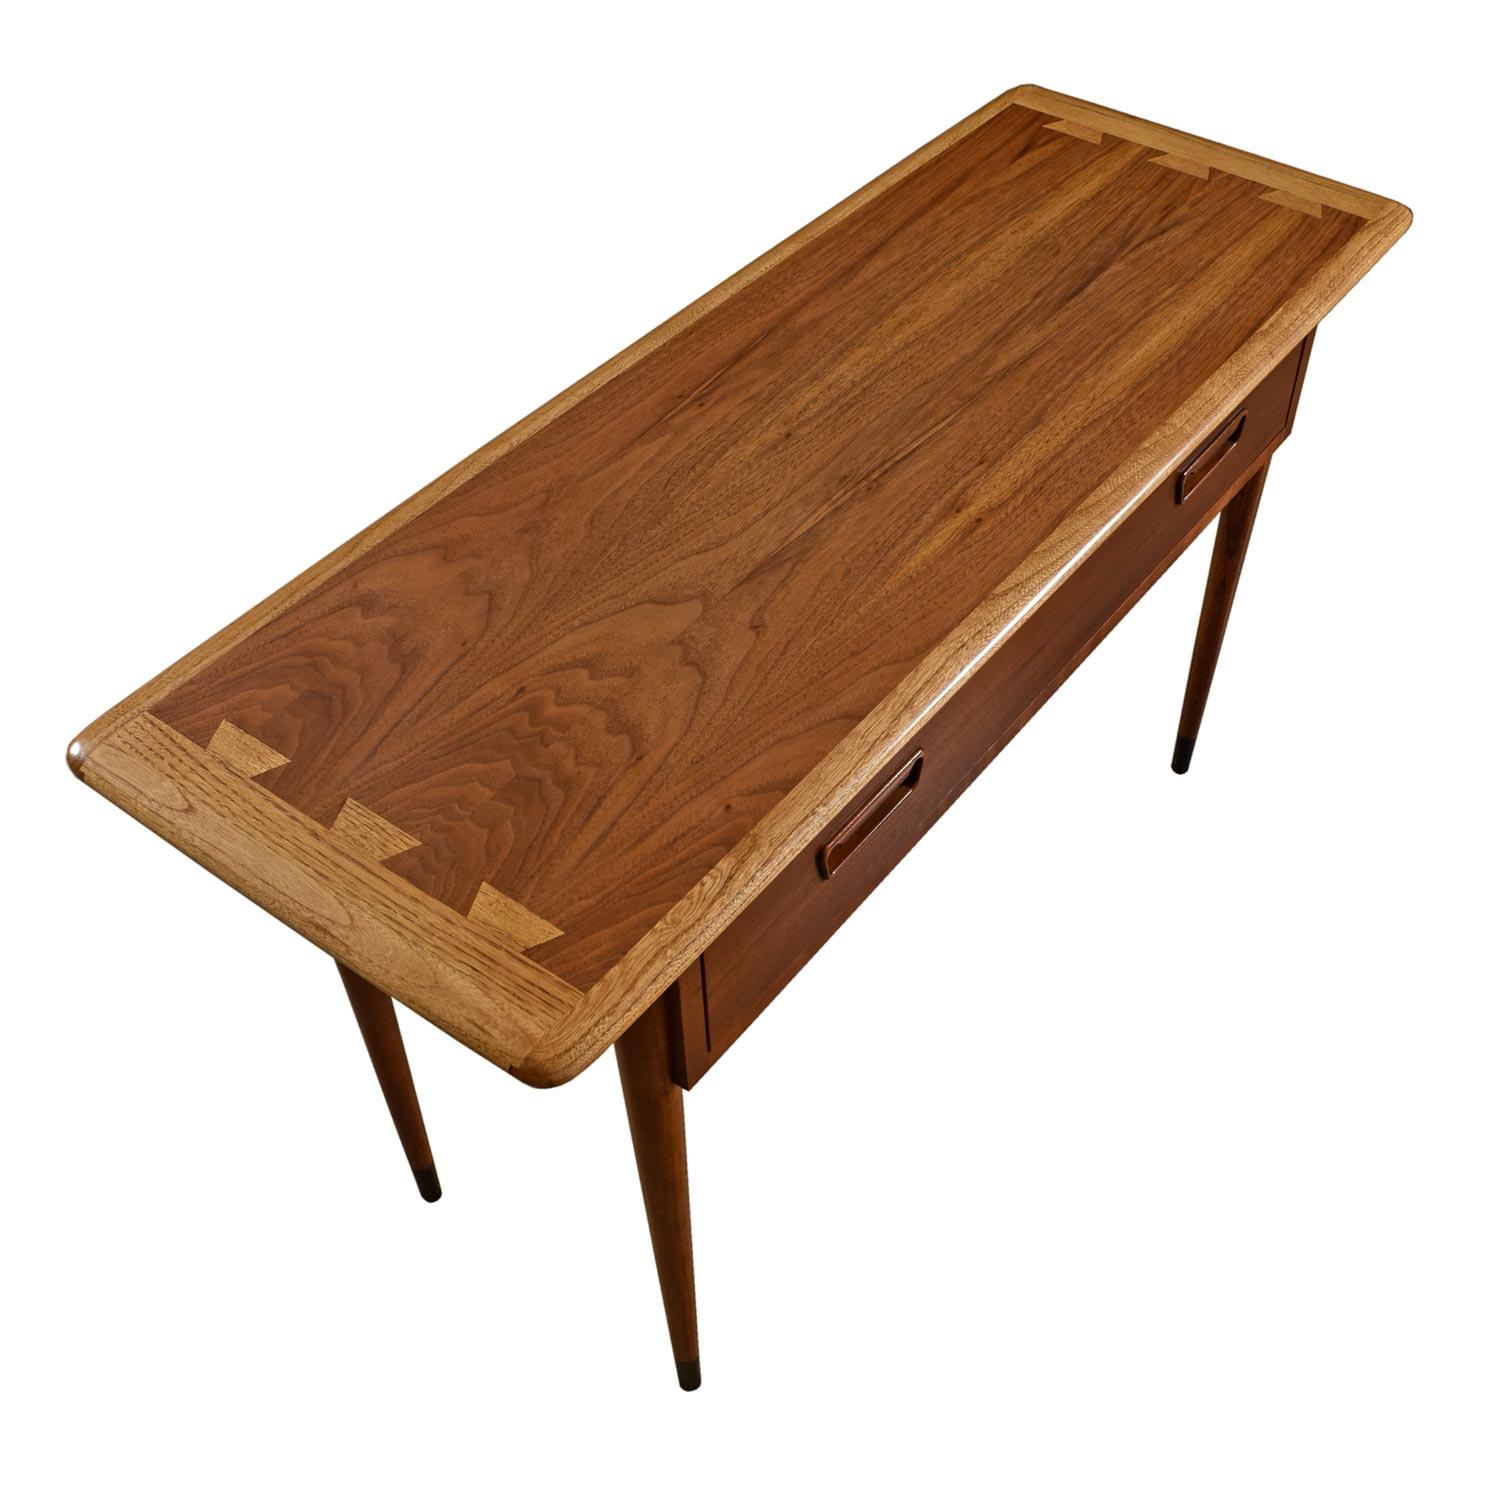 Refinished Mid-Century Modern Lane Acclaim console table. This is a hard to find piece from the Acclaim Line. After a decade in the MCM furniture business, this is the first one we've had on our showroom. Originally intended as a hallway or console